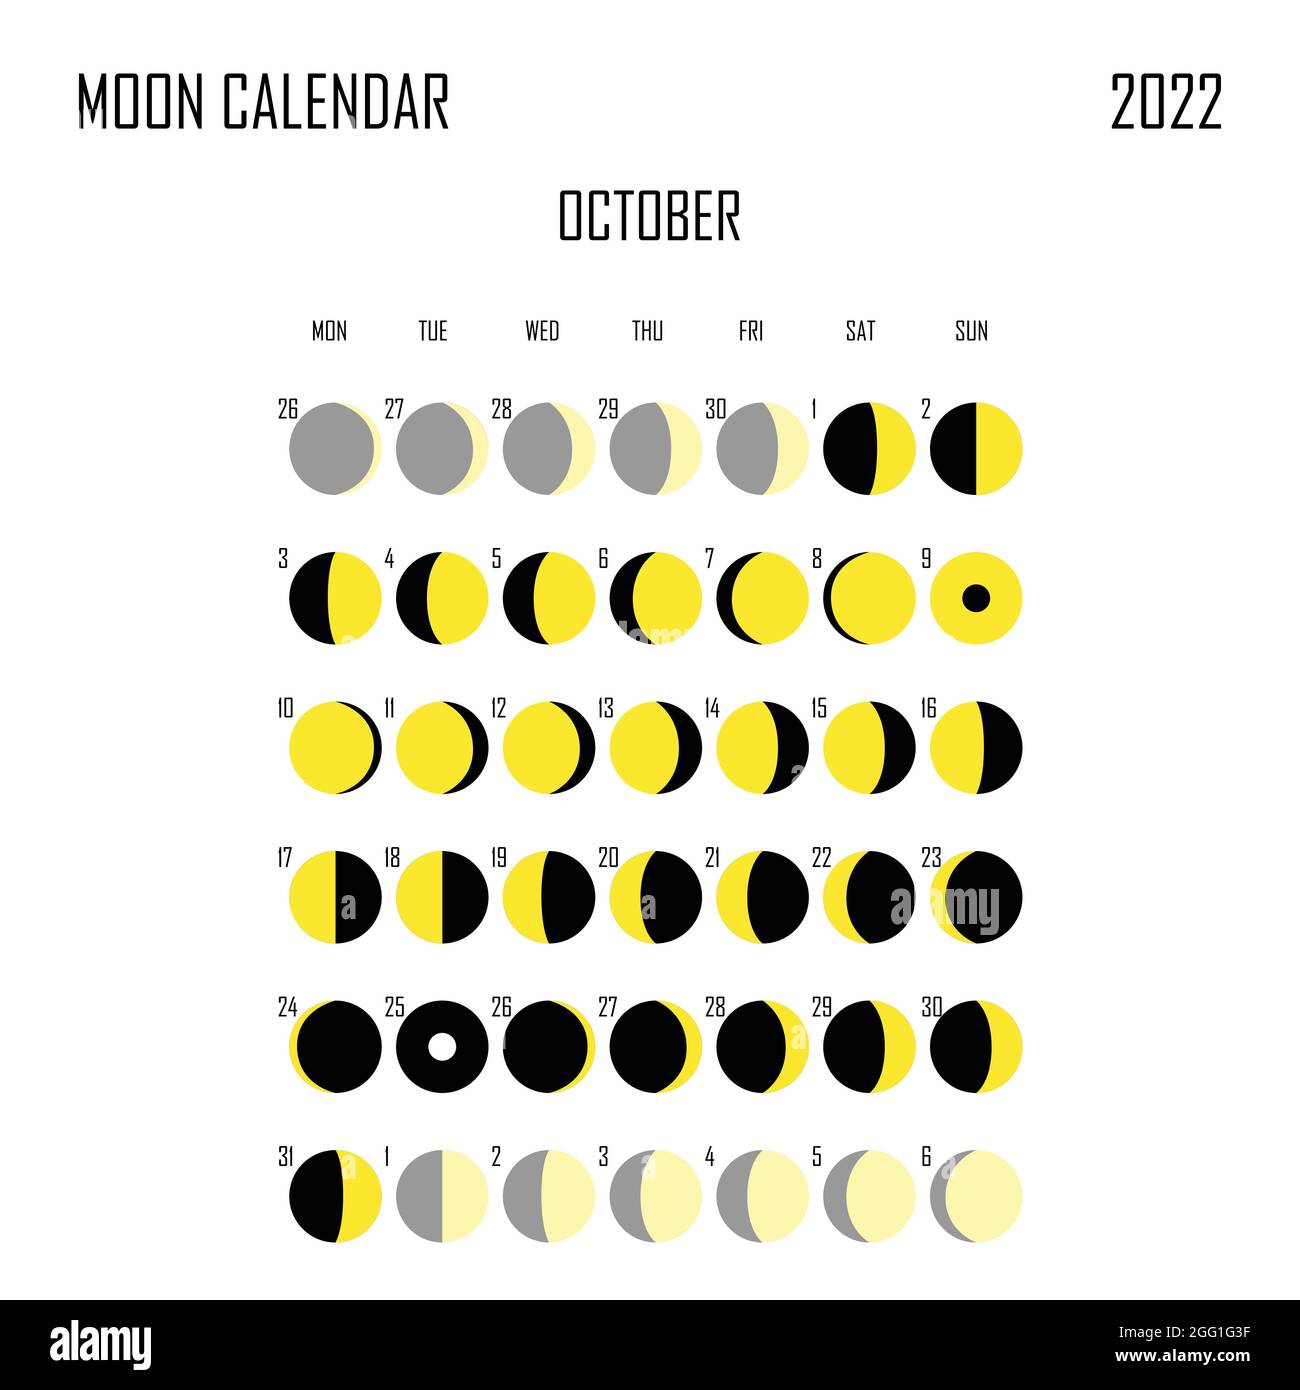 October 2022 Moon Calendar Astrological Calendar Design Planner Place For Stickers Month Cycle Planner Mockup Isolated Black And White Background Stock Vector Image Art Alamy